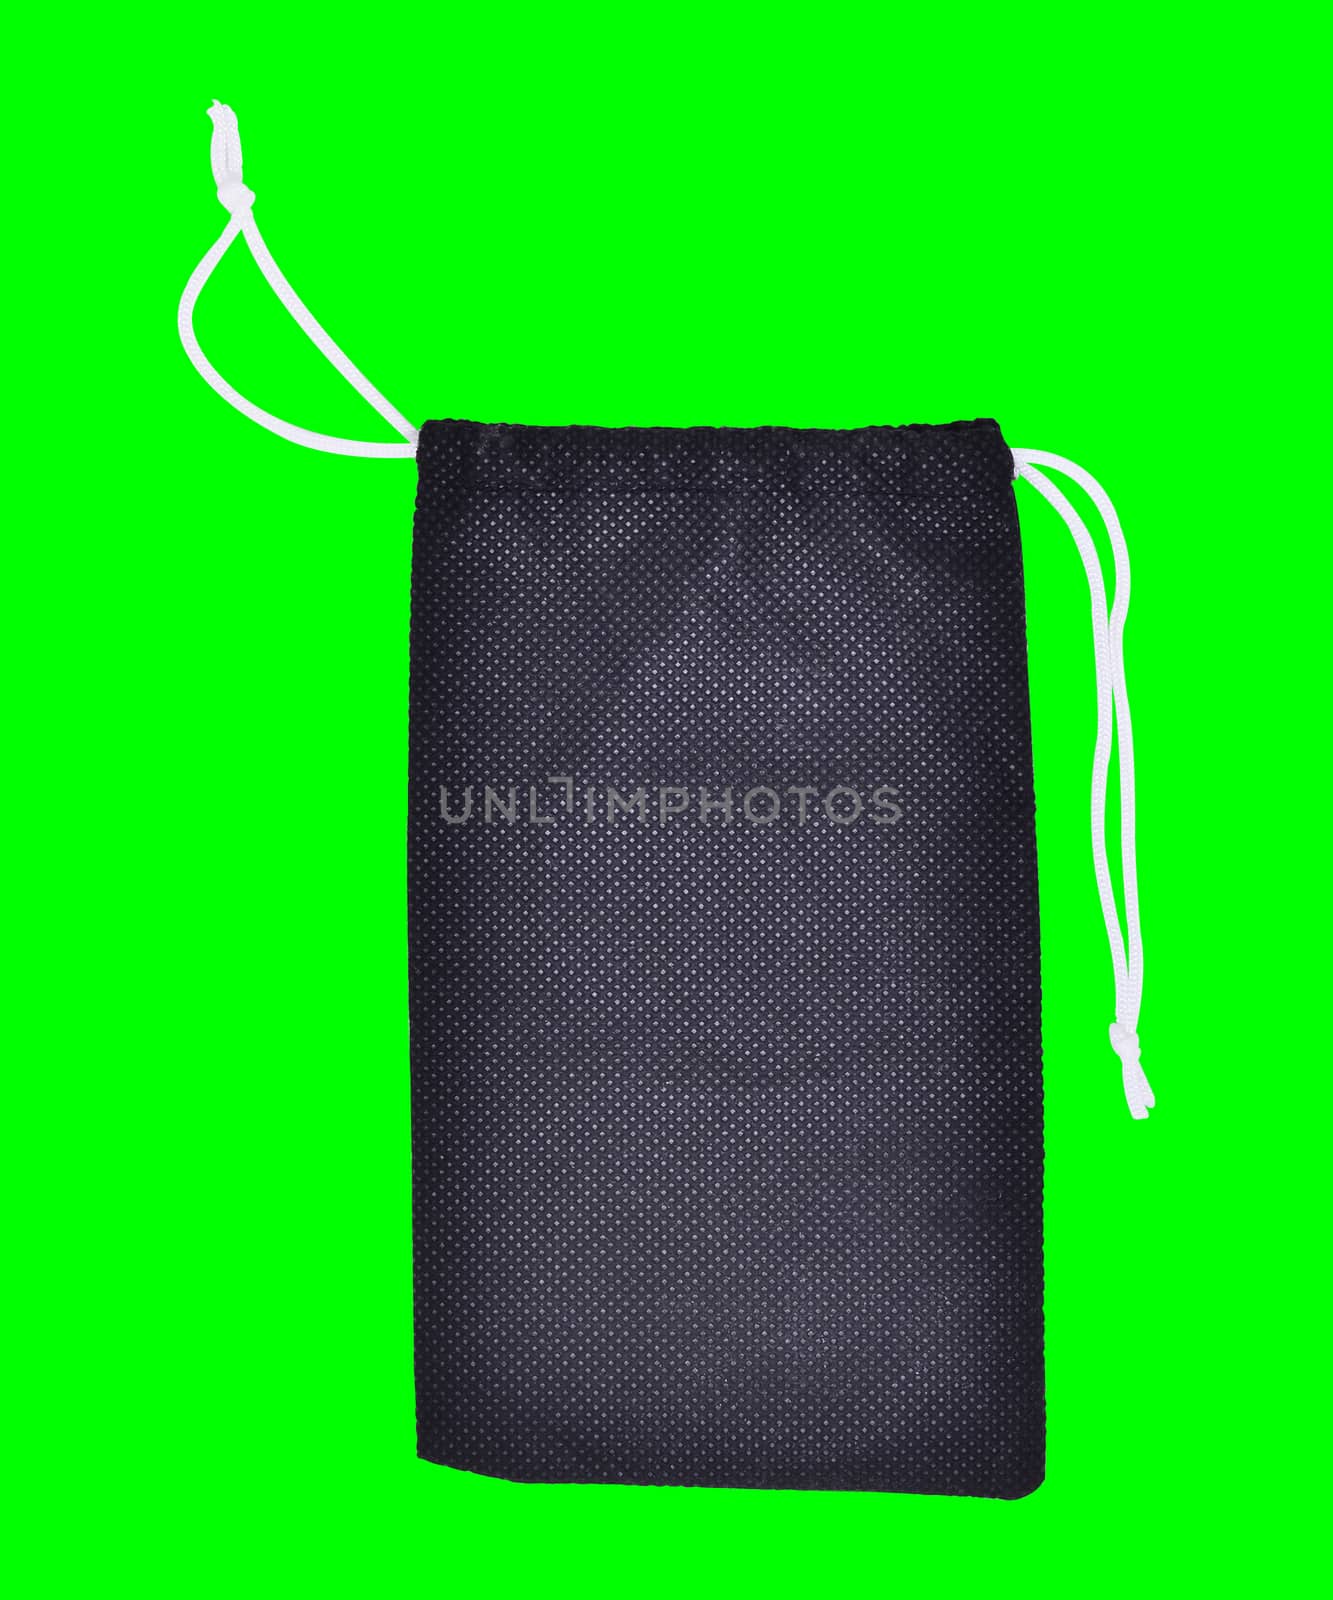 Black Bags White Rope Fabric green screen by phochi